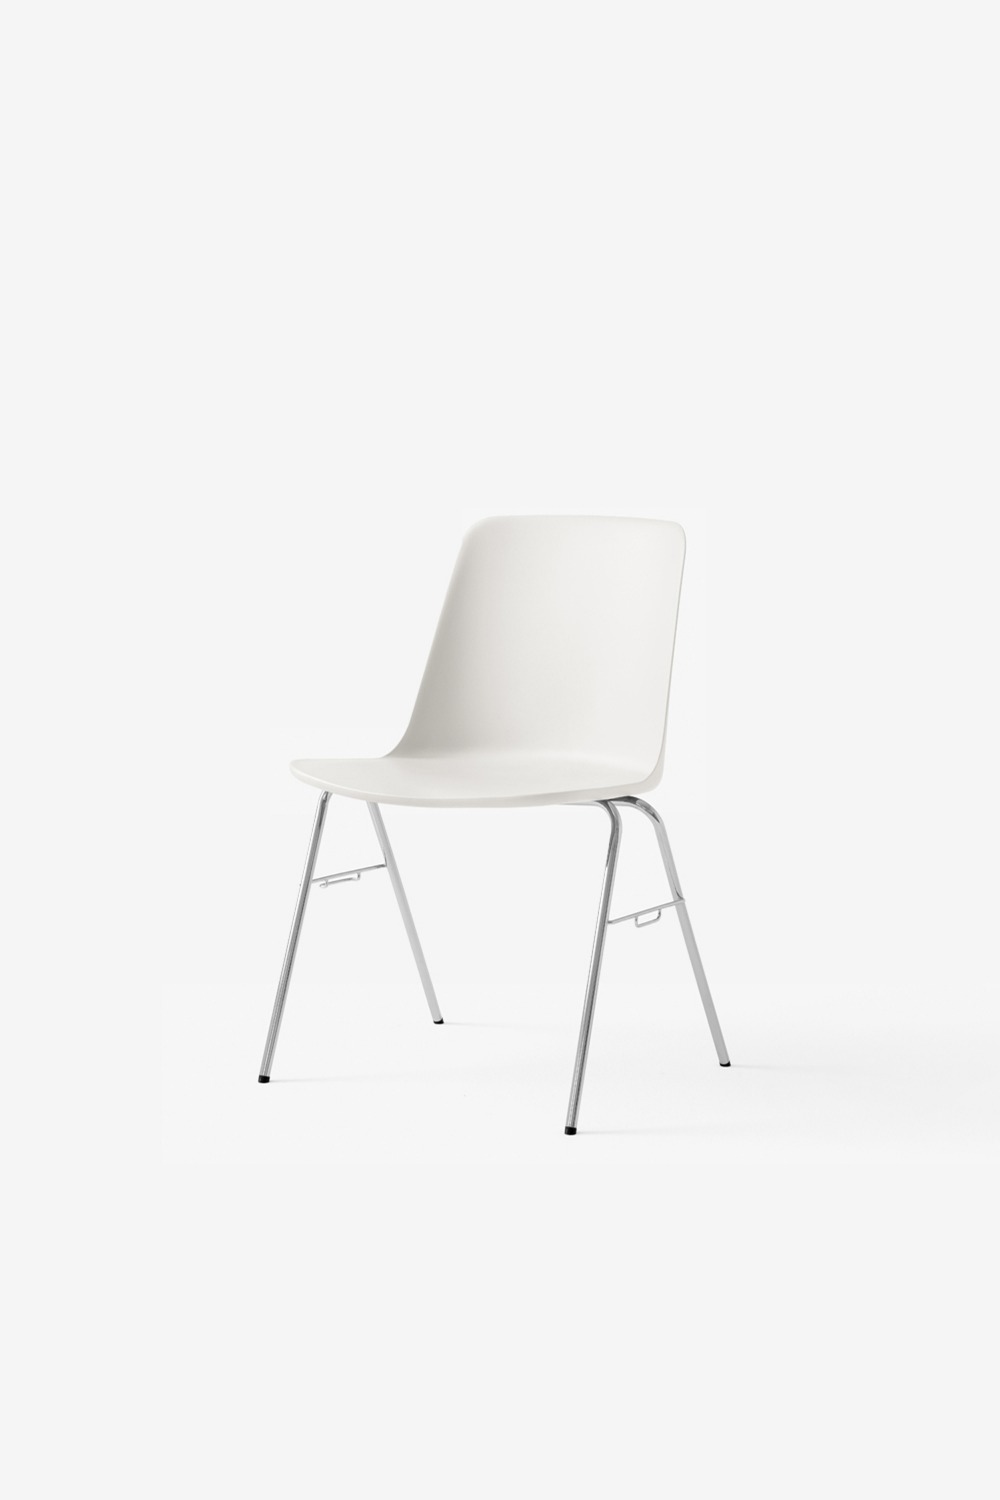 [&amp;Tradition] Rely Chair / HW27 (White/Chrome)